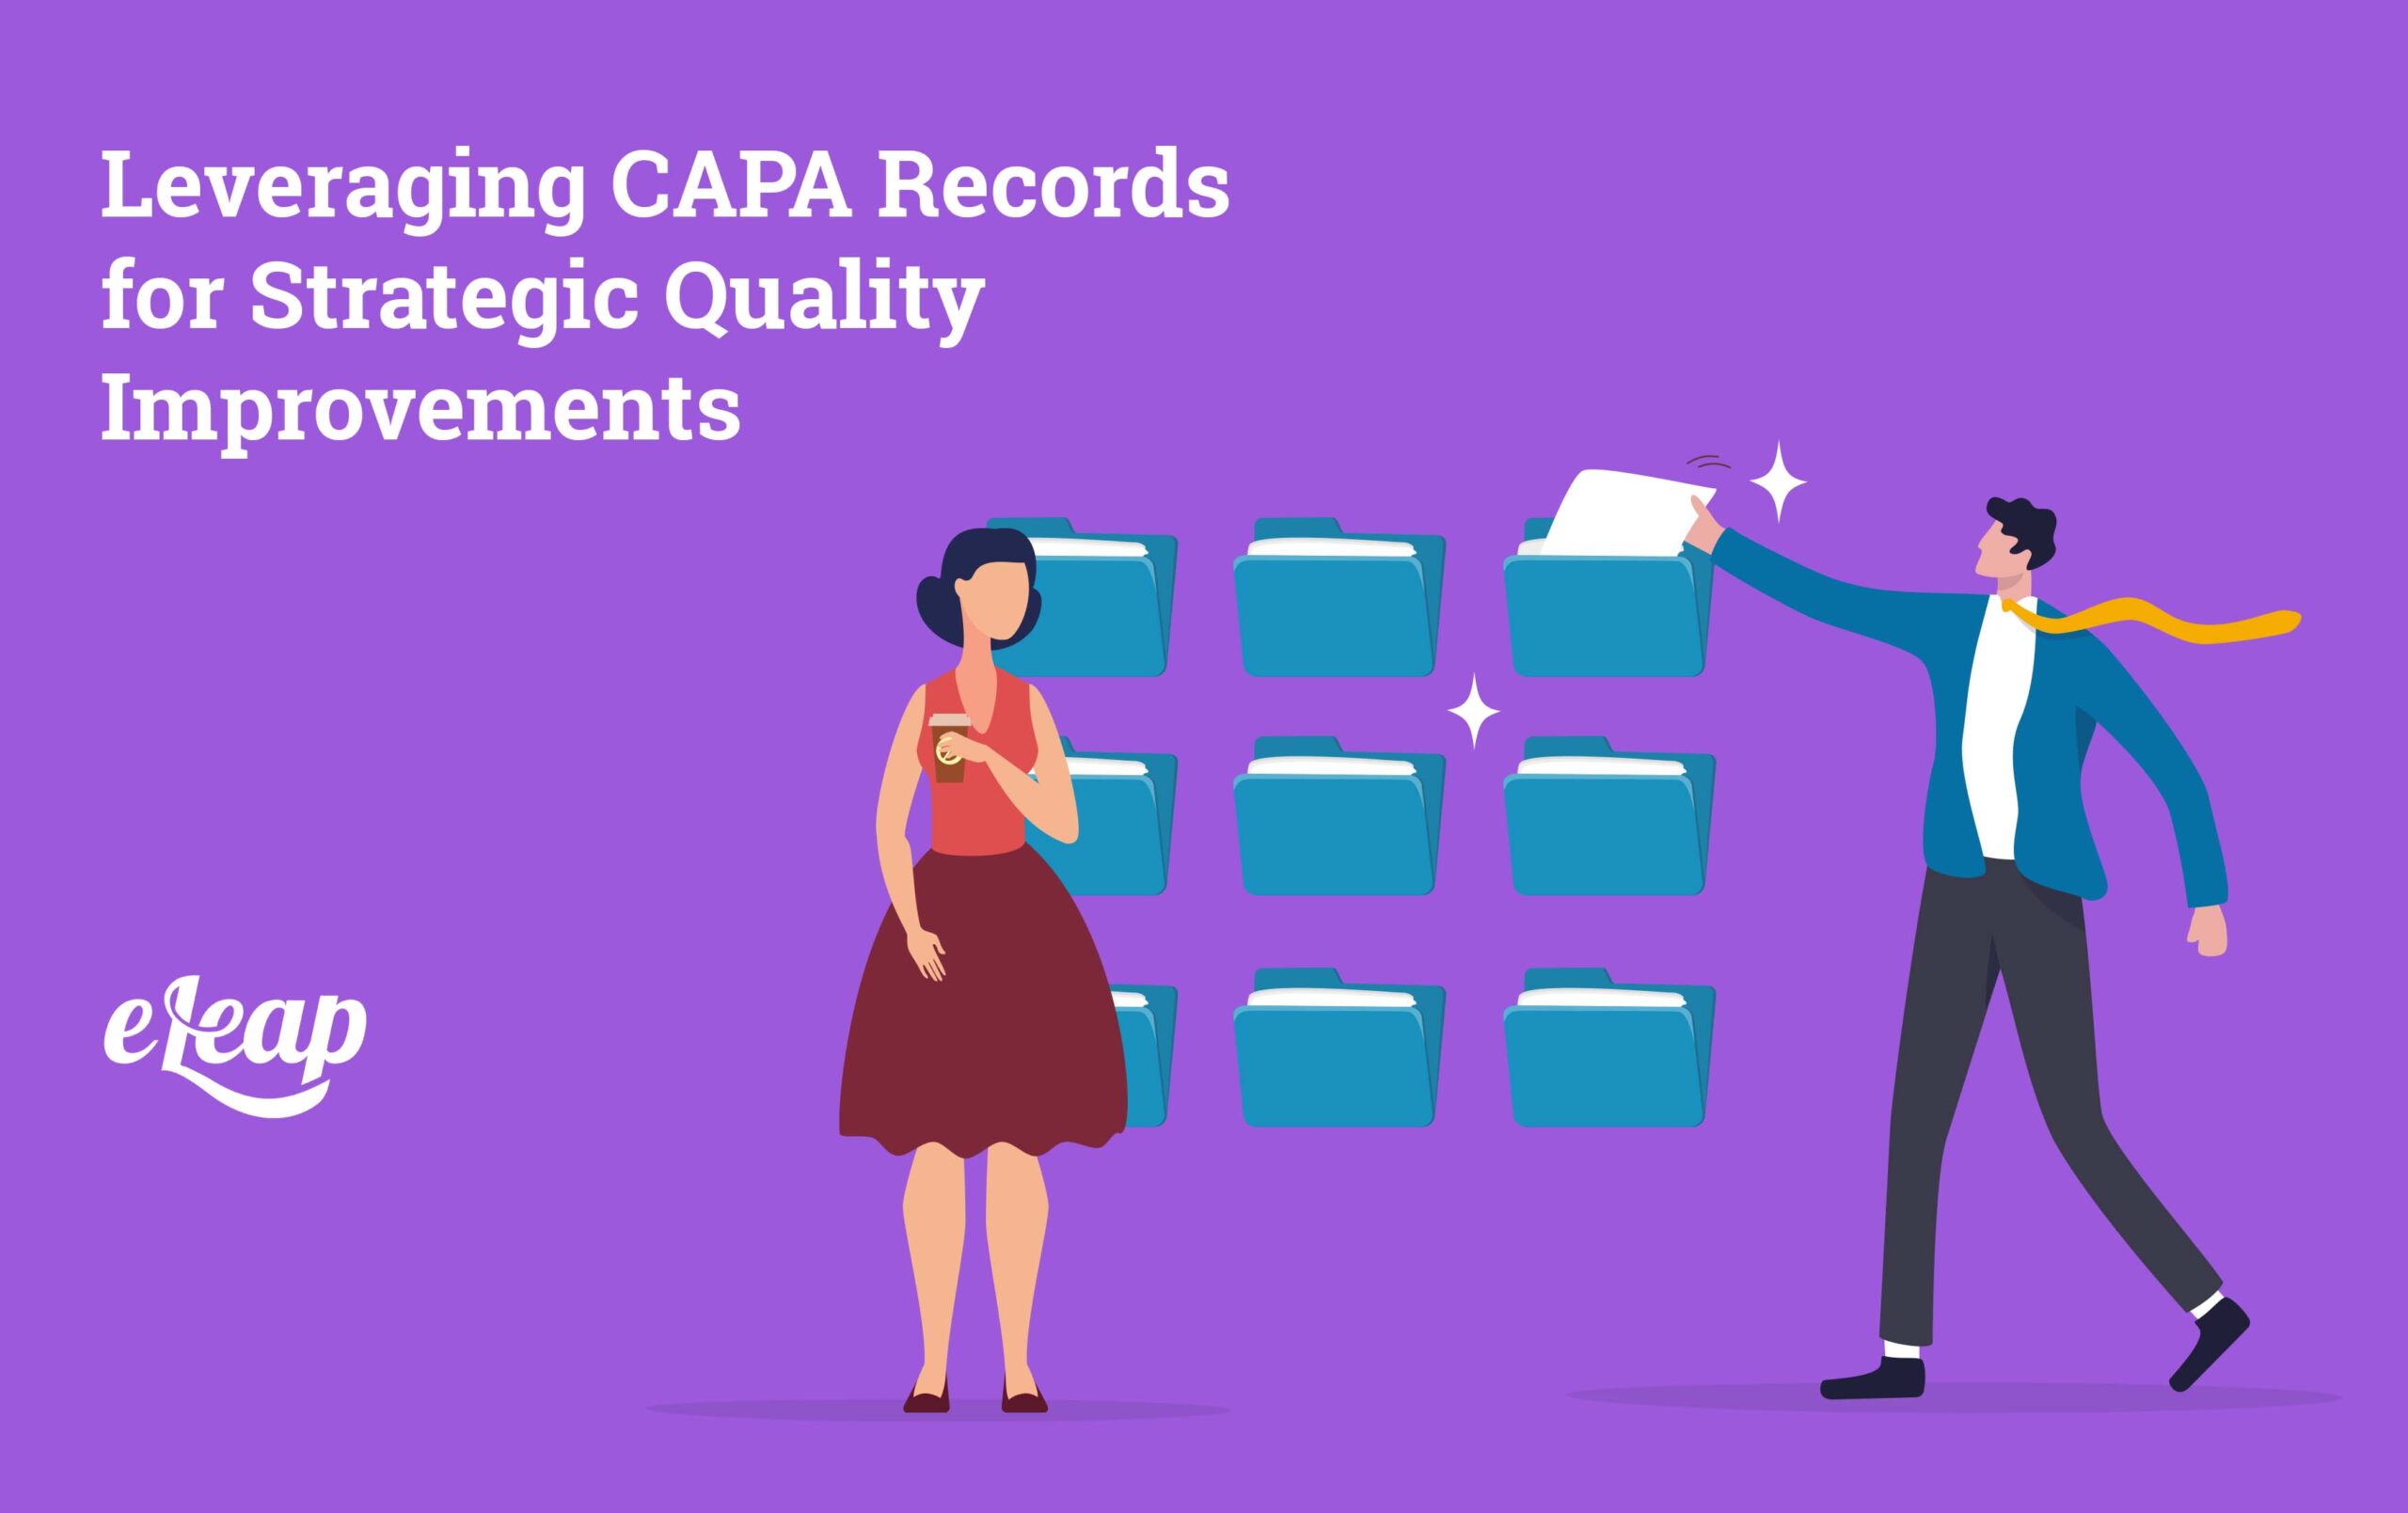 Leveraging CAPA Records for Strategic Quality Improvements